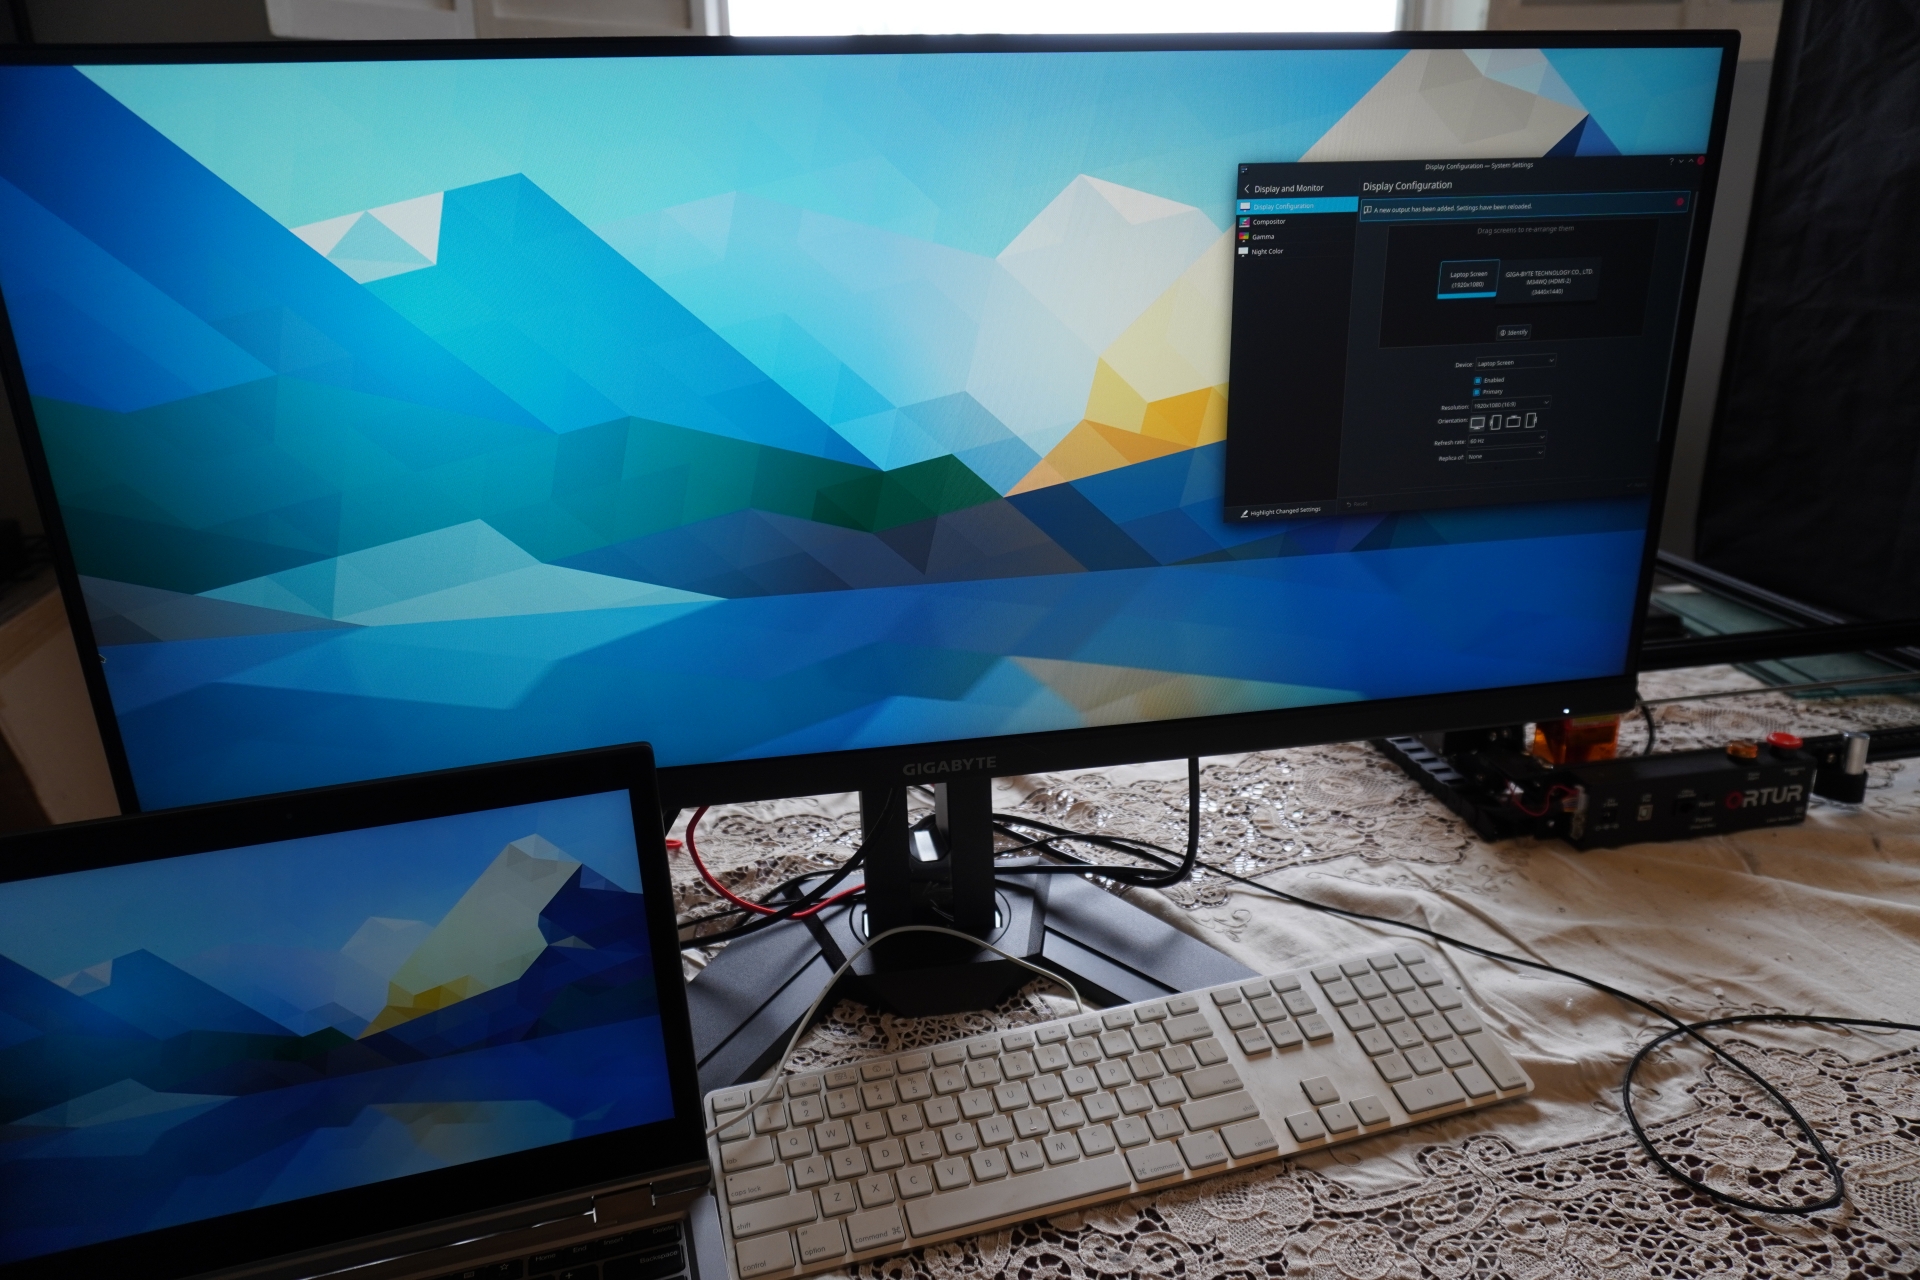 Linux at 1440p with the Gigabyte M34WQ Ultrawide Monitor